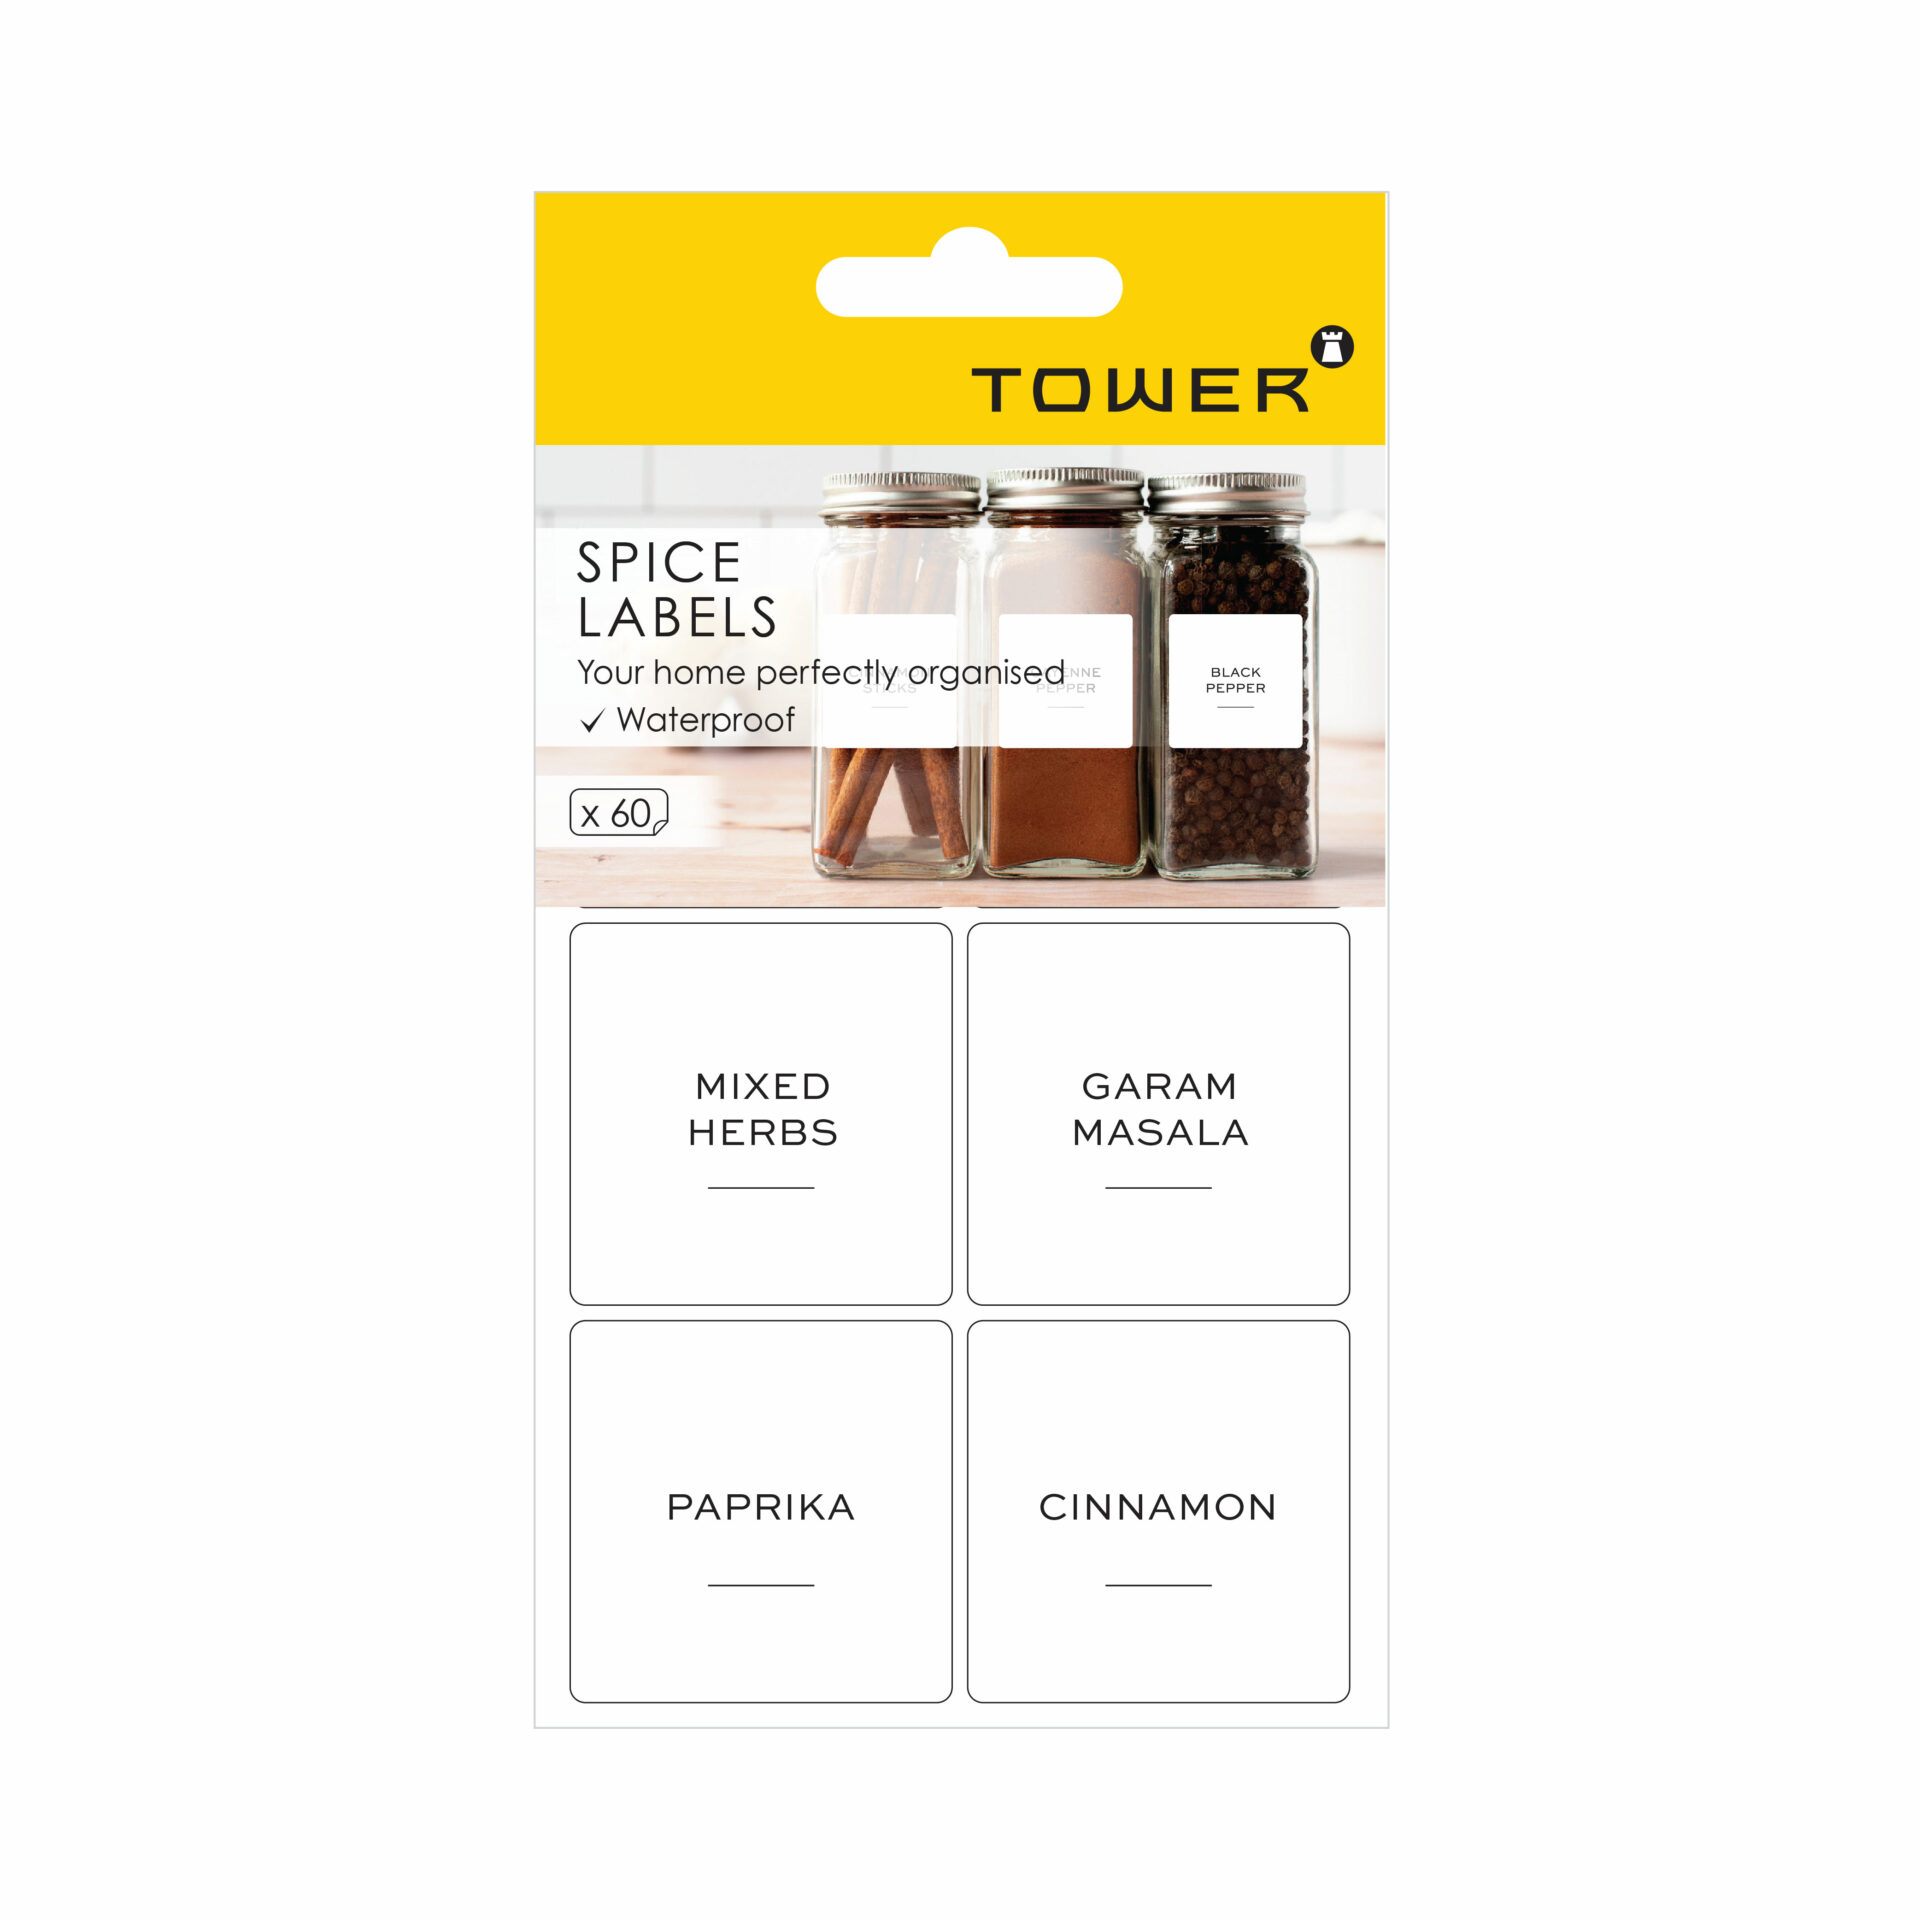 TOWER Spice labels